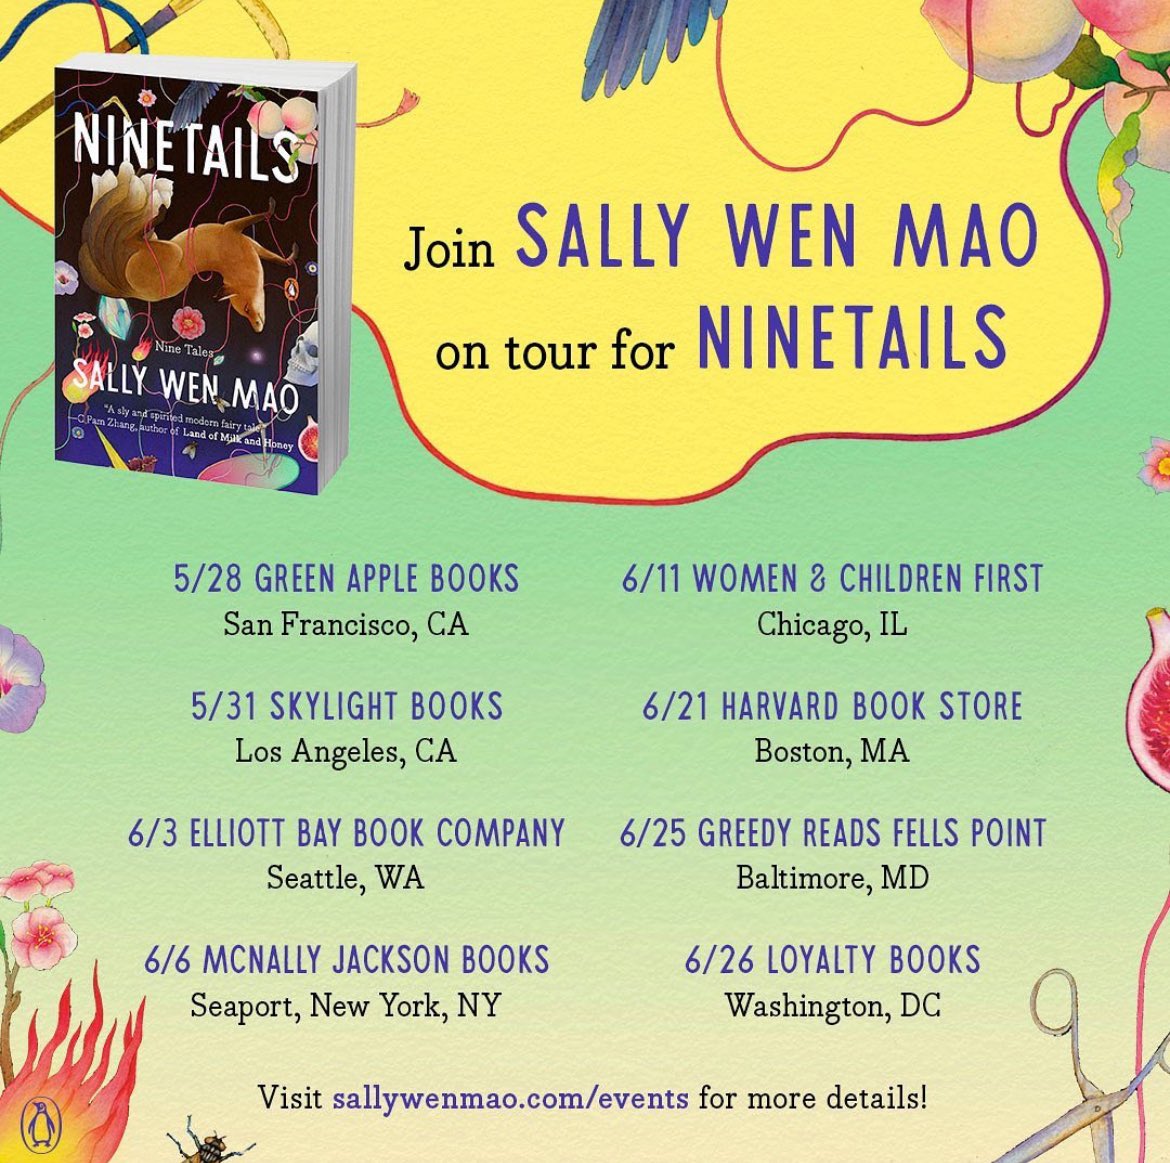 📆 MARK YOUR CALENDARS! 📅 Join @sallywenmao on tour for her fabulist debut collection of stories re-imagining the nine-tailed fox spirit of Asian folklore, NINETAILS, on sale 5/28! 🦊✨ Find more event information here 👉 sallywenmao.com/events